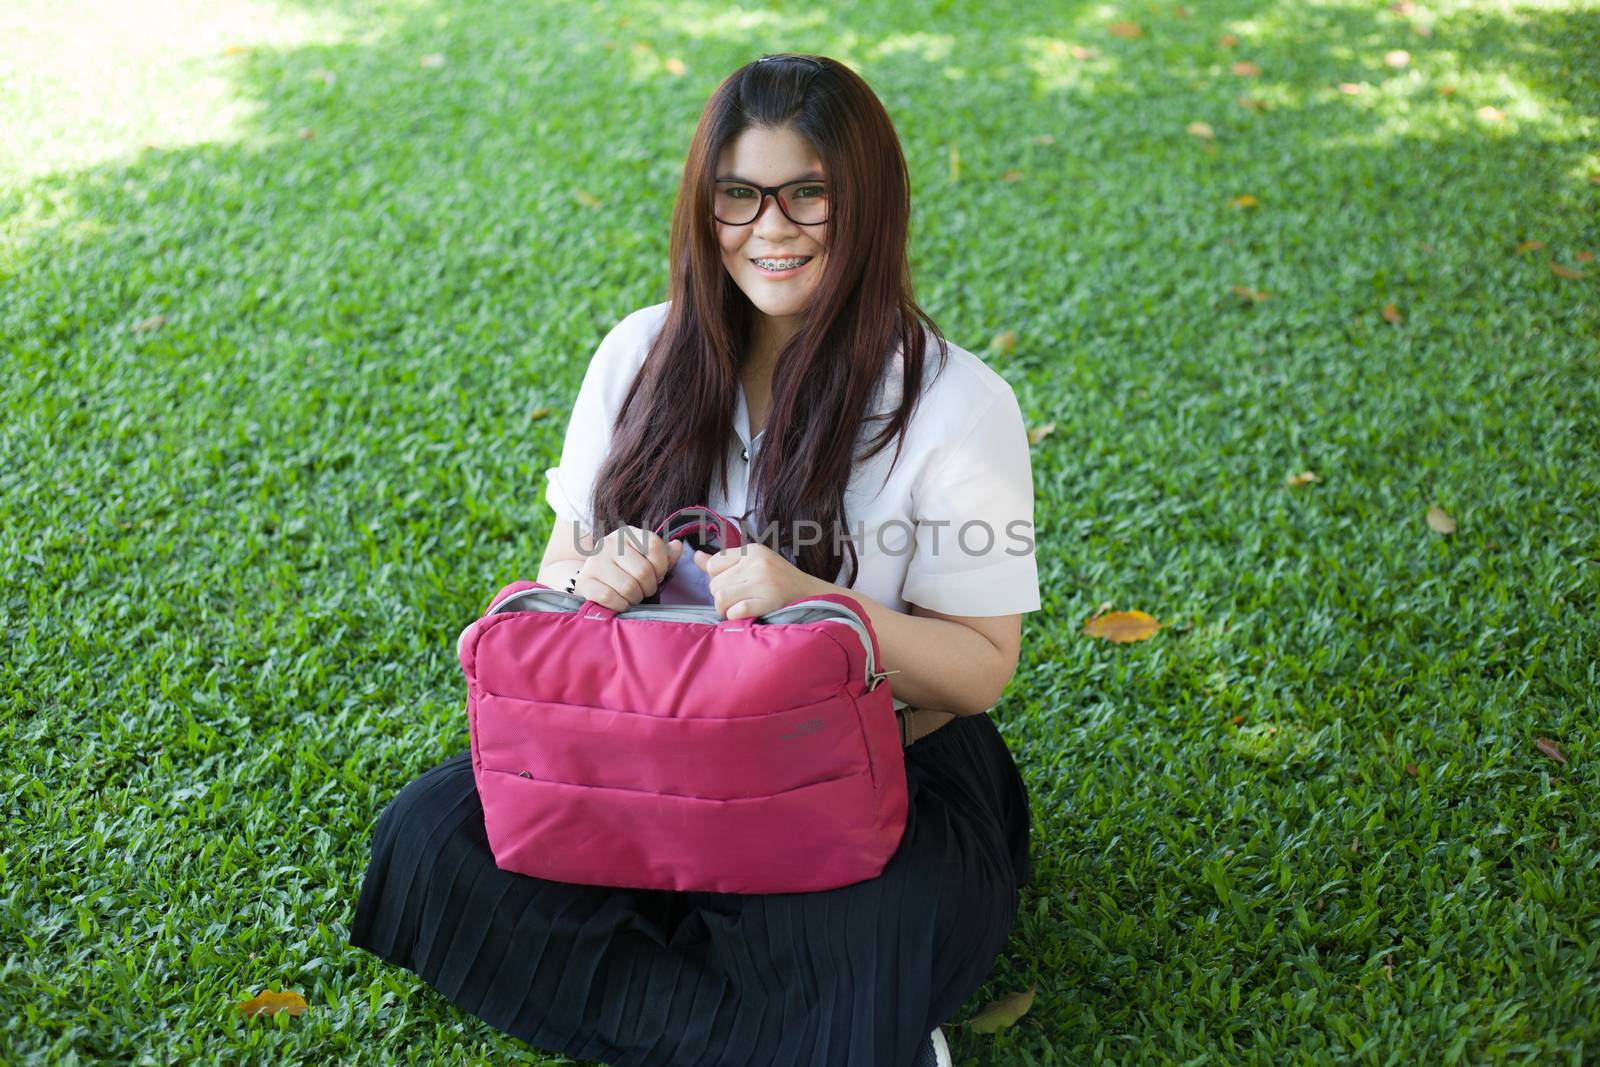 Female student sitting on the lawn. Pink bag was placed on it.